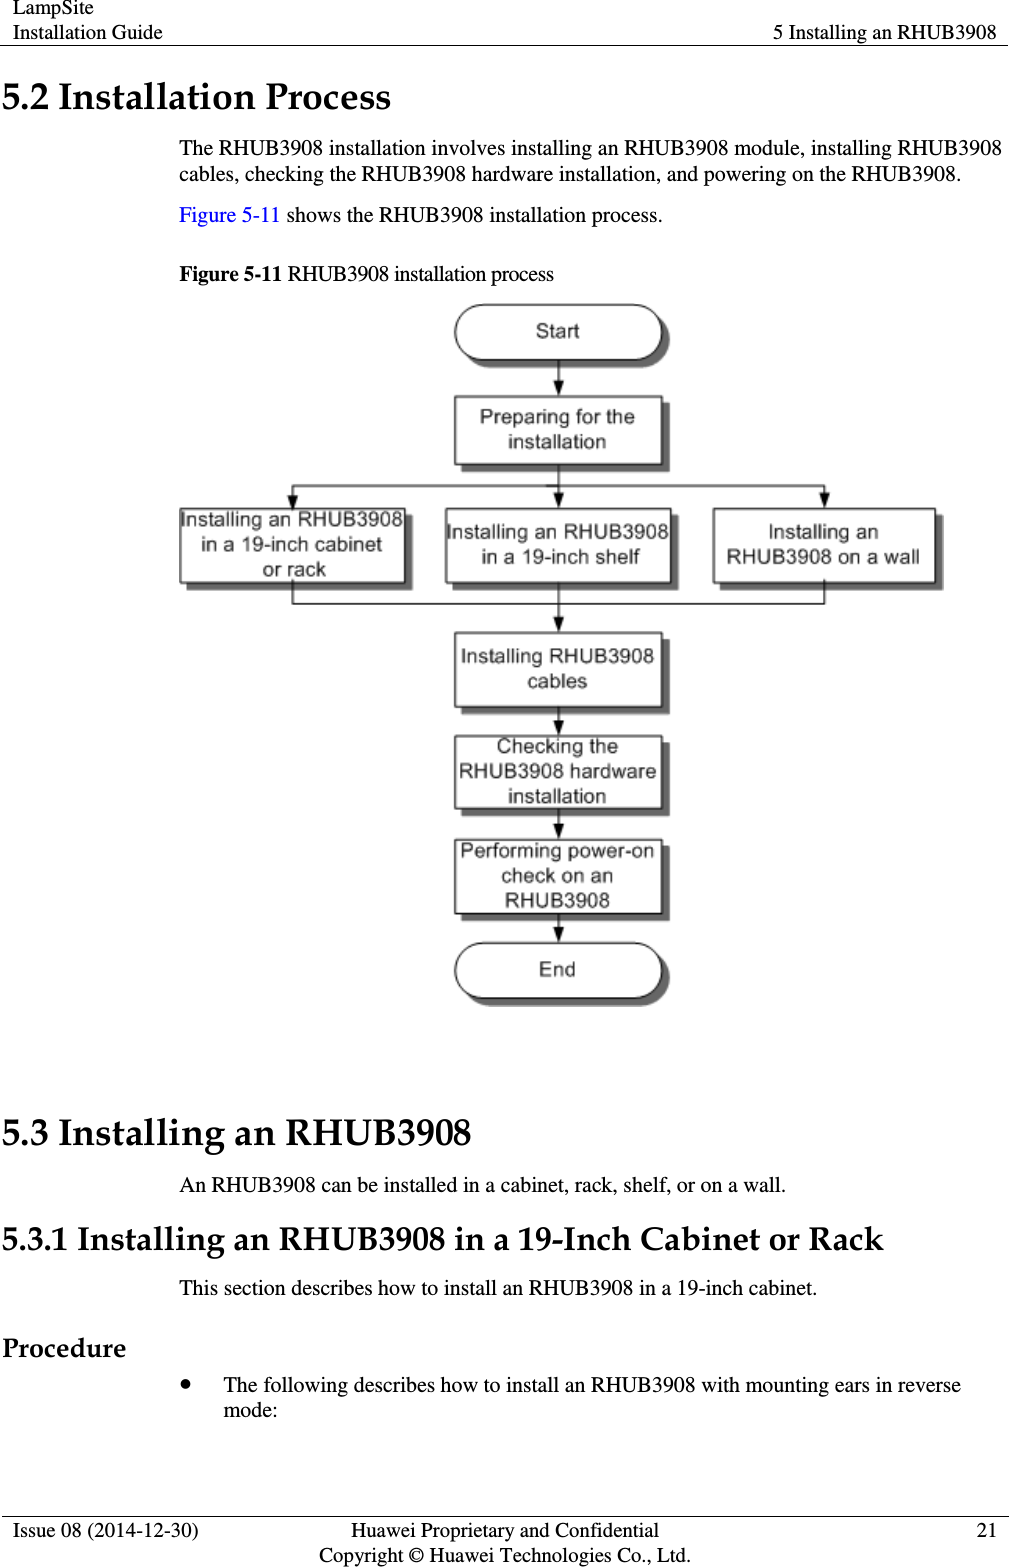 LampSite Installation Guide 5 Installing an RHUB3908  Issue 08 (2014-12-30) Huawei Proprietary and Confidential                                     Copyright © Huawei Technologies Co., Ltd. 21  5.2 Installation Process The RHUB3908 installation involves installing an RHUB3908 module, installing RHUB3908 cables, checking the RHUB3908 hardware installation, and powering on the RHUB3908.     Figure 5-11 shows the RHUB3908 installation process.   Figure 5-11 RHUB3908 installation process   5.3 Installing an RHUB3908 An RHUB3908 can be installed in a cabinet, rack, shelf, or on a wall.   5.3.1 Installing an RHUB3908 in a 19-Inch Cabinet or Rack This section describes how to install an RHUB3908 in a 19-inch cabinet.   Procedure  The following describes how to install an RHUB3908 with mounting ears in reverse mode:   